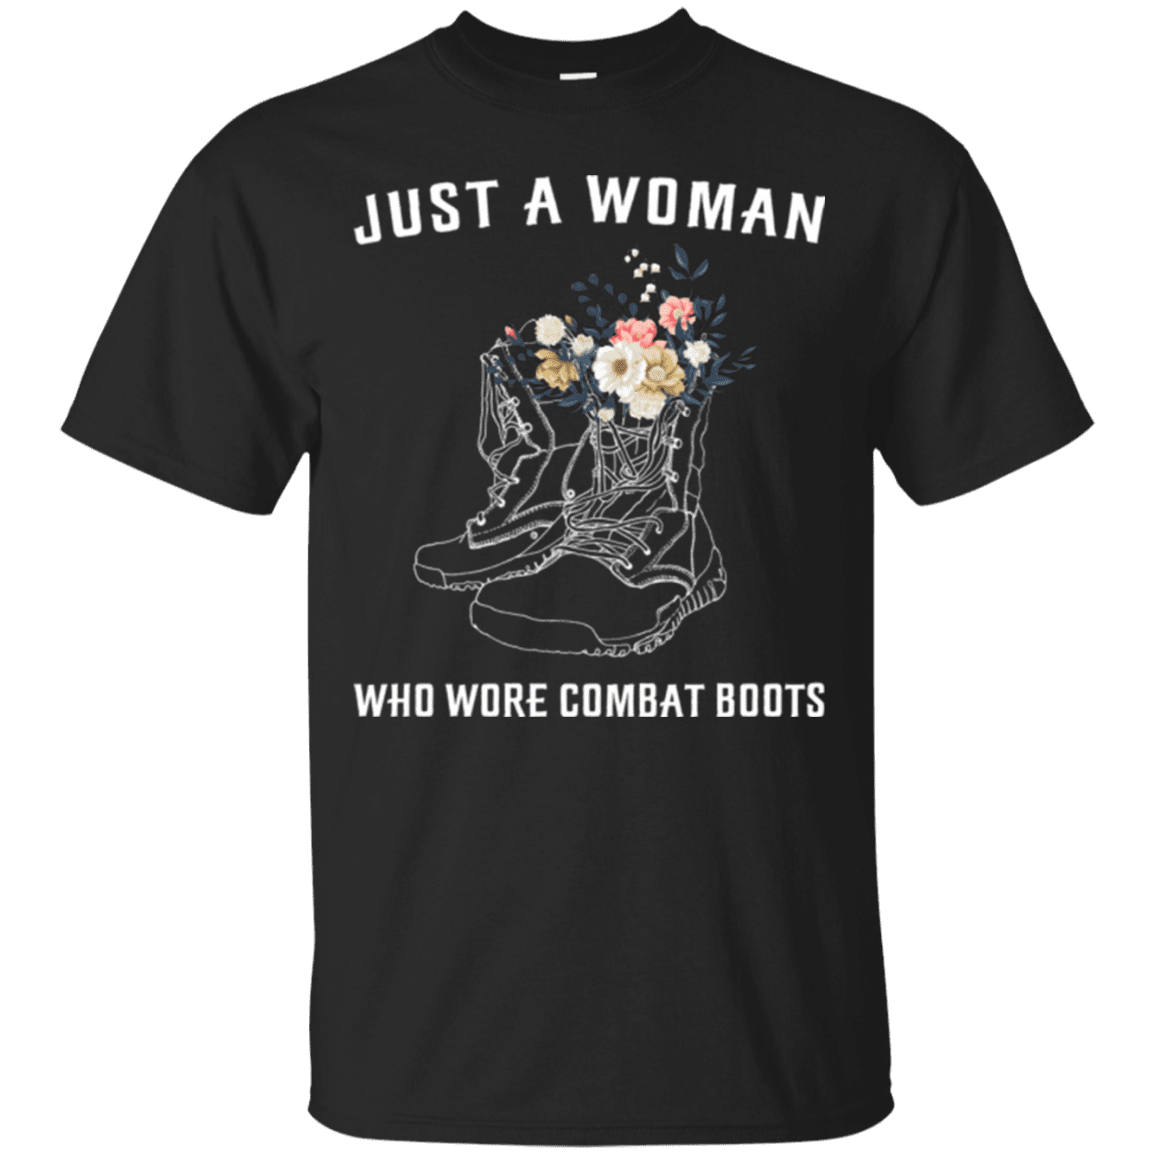 Military T-Shirt ”Just A Woman Who More Combat Boots”